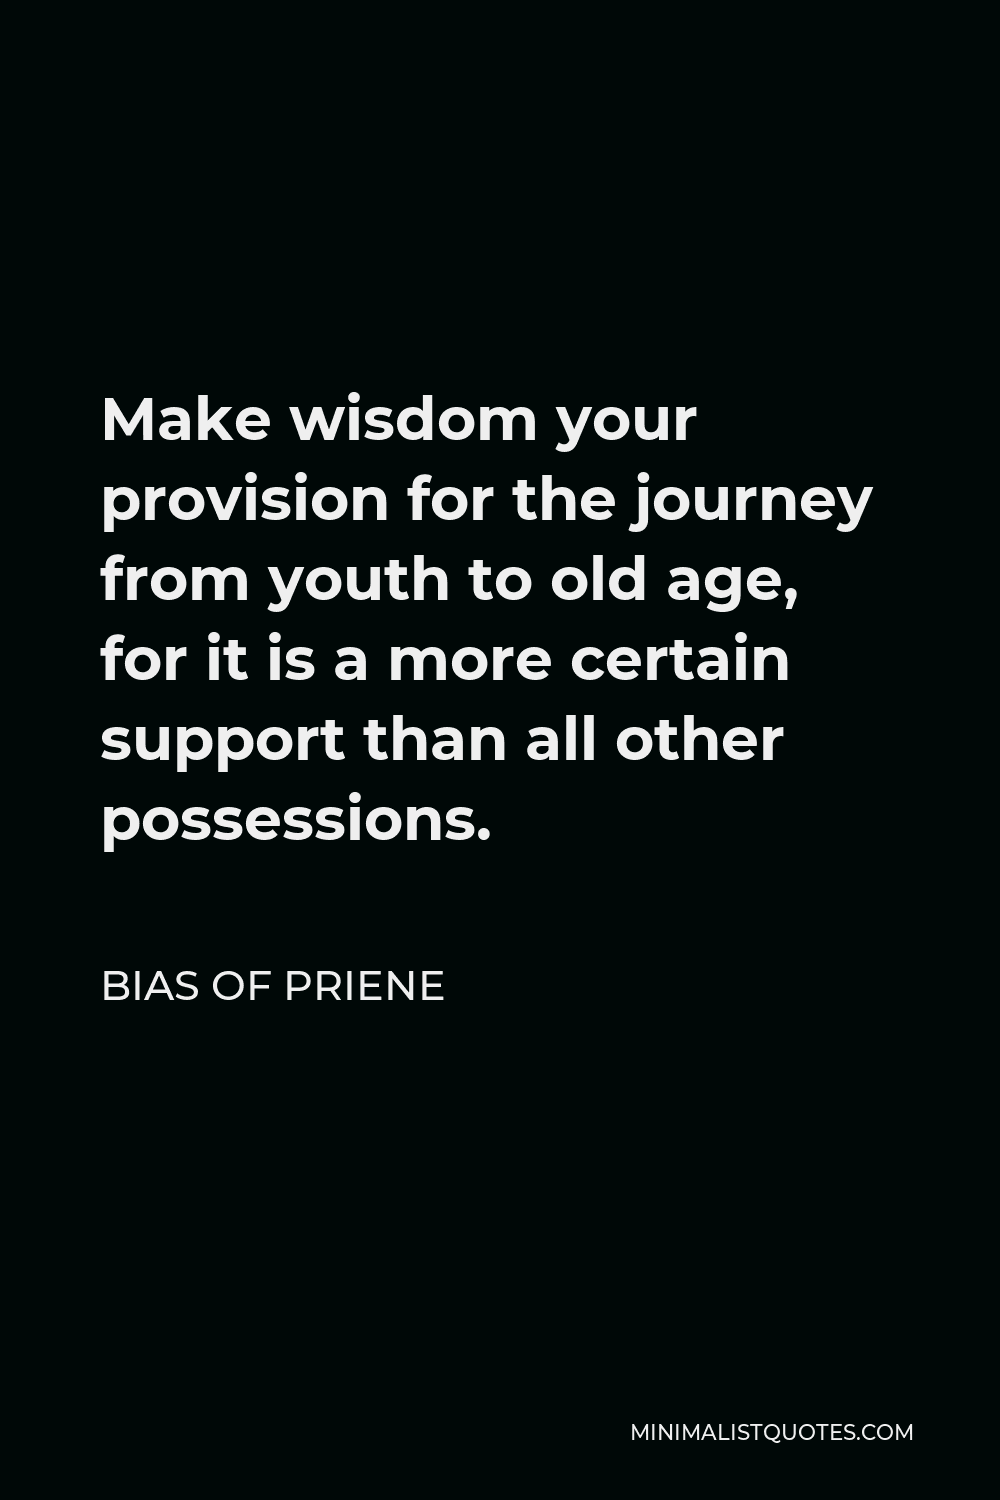 Bias of Priene Quote - Make wisdom your provision for the journey from youth to old age, for it is a more certain support than all other possessions.